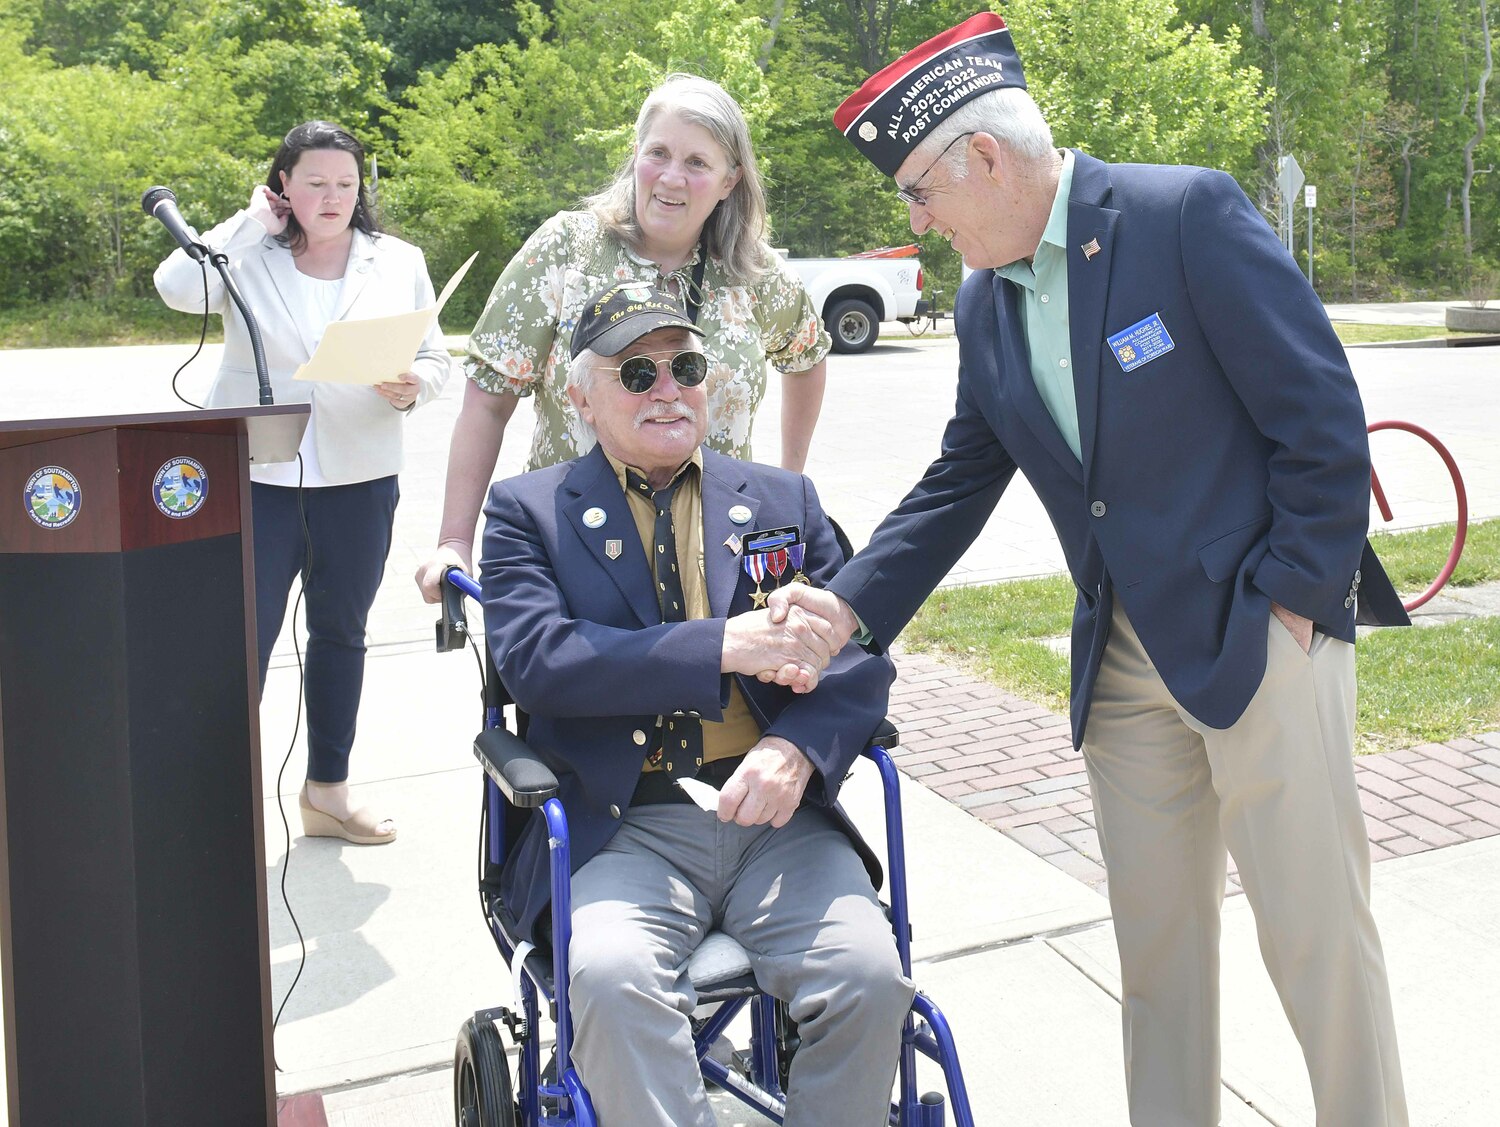 Veterans Ron Campsey and William M. Hughes Jr. in Good Ground Park on Monday.  DANA SHAW